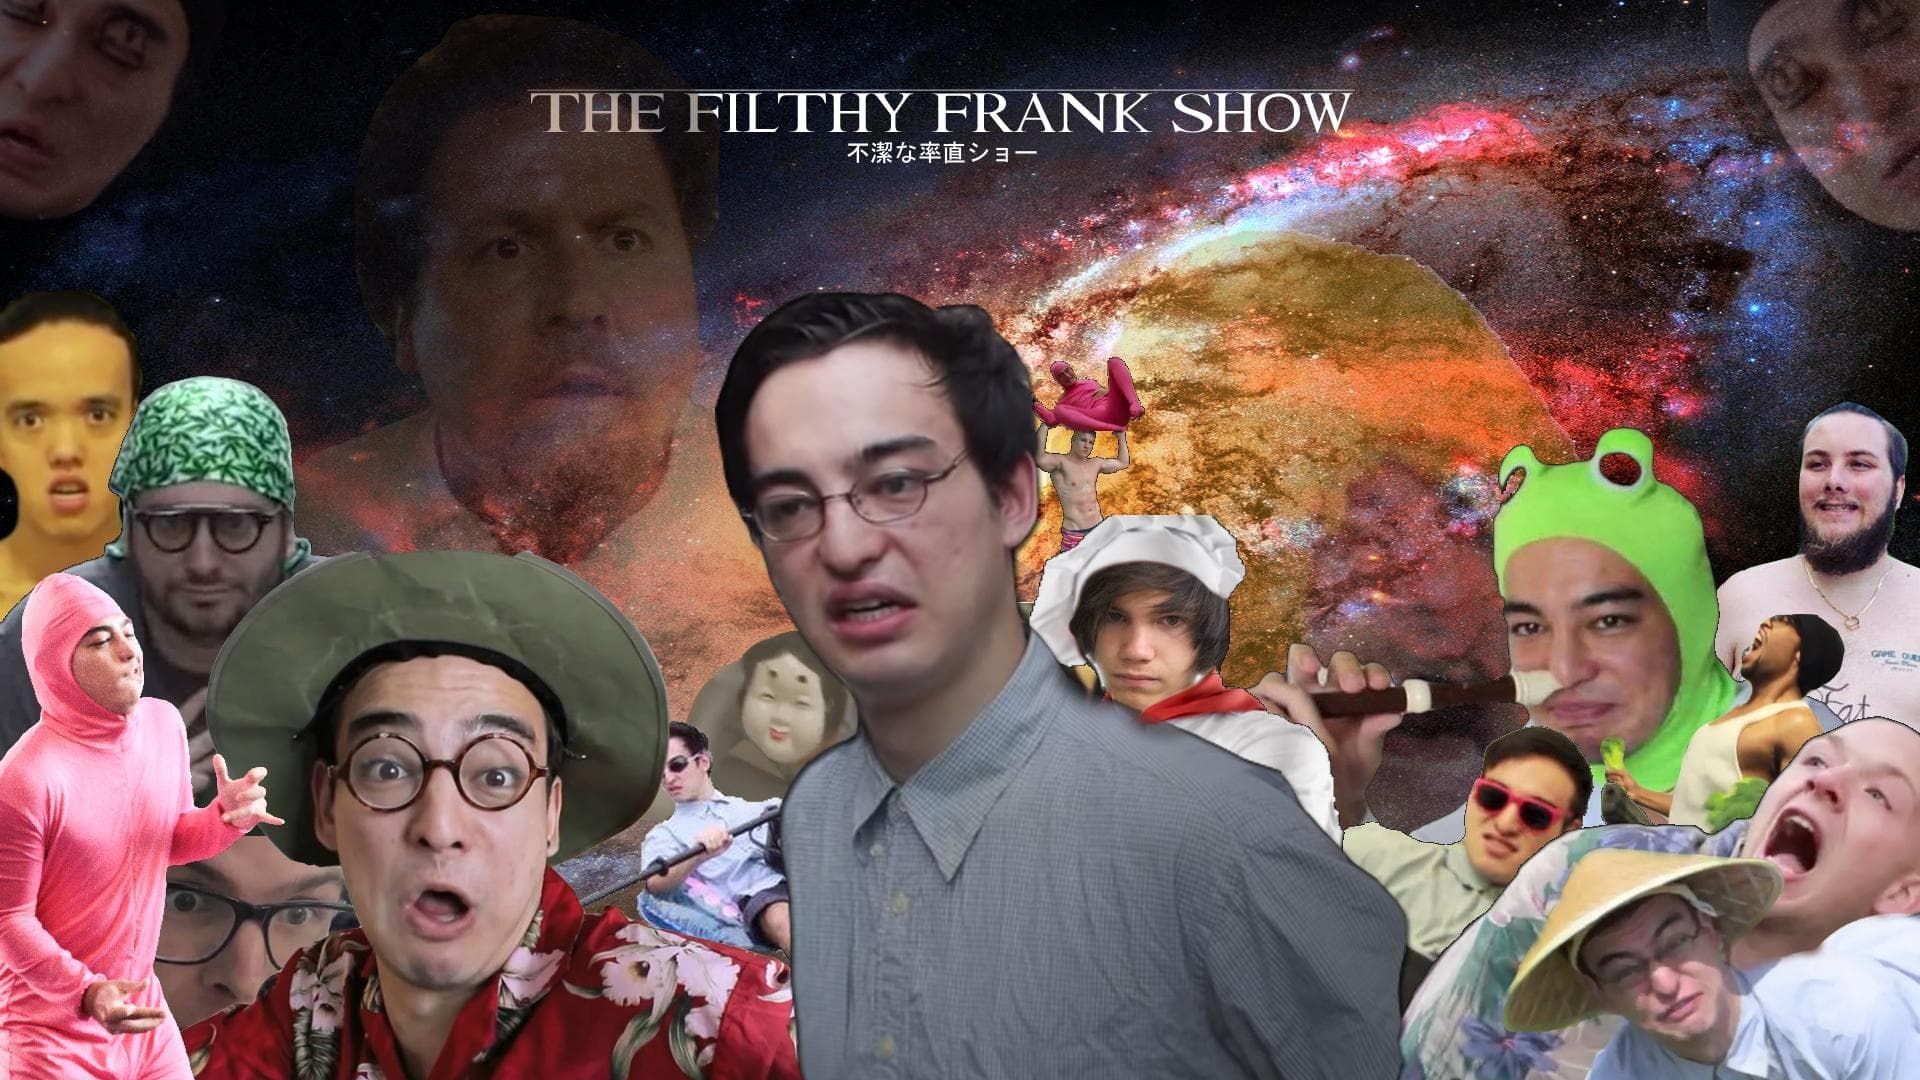 The Filthy Frank Show background